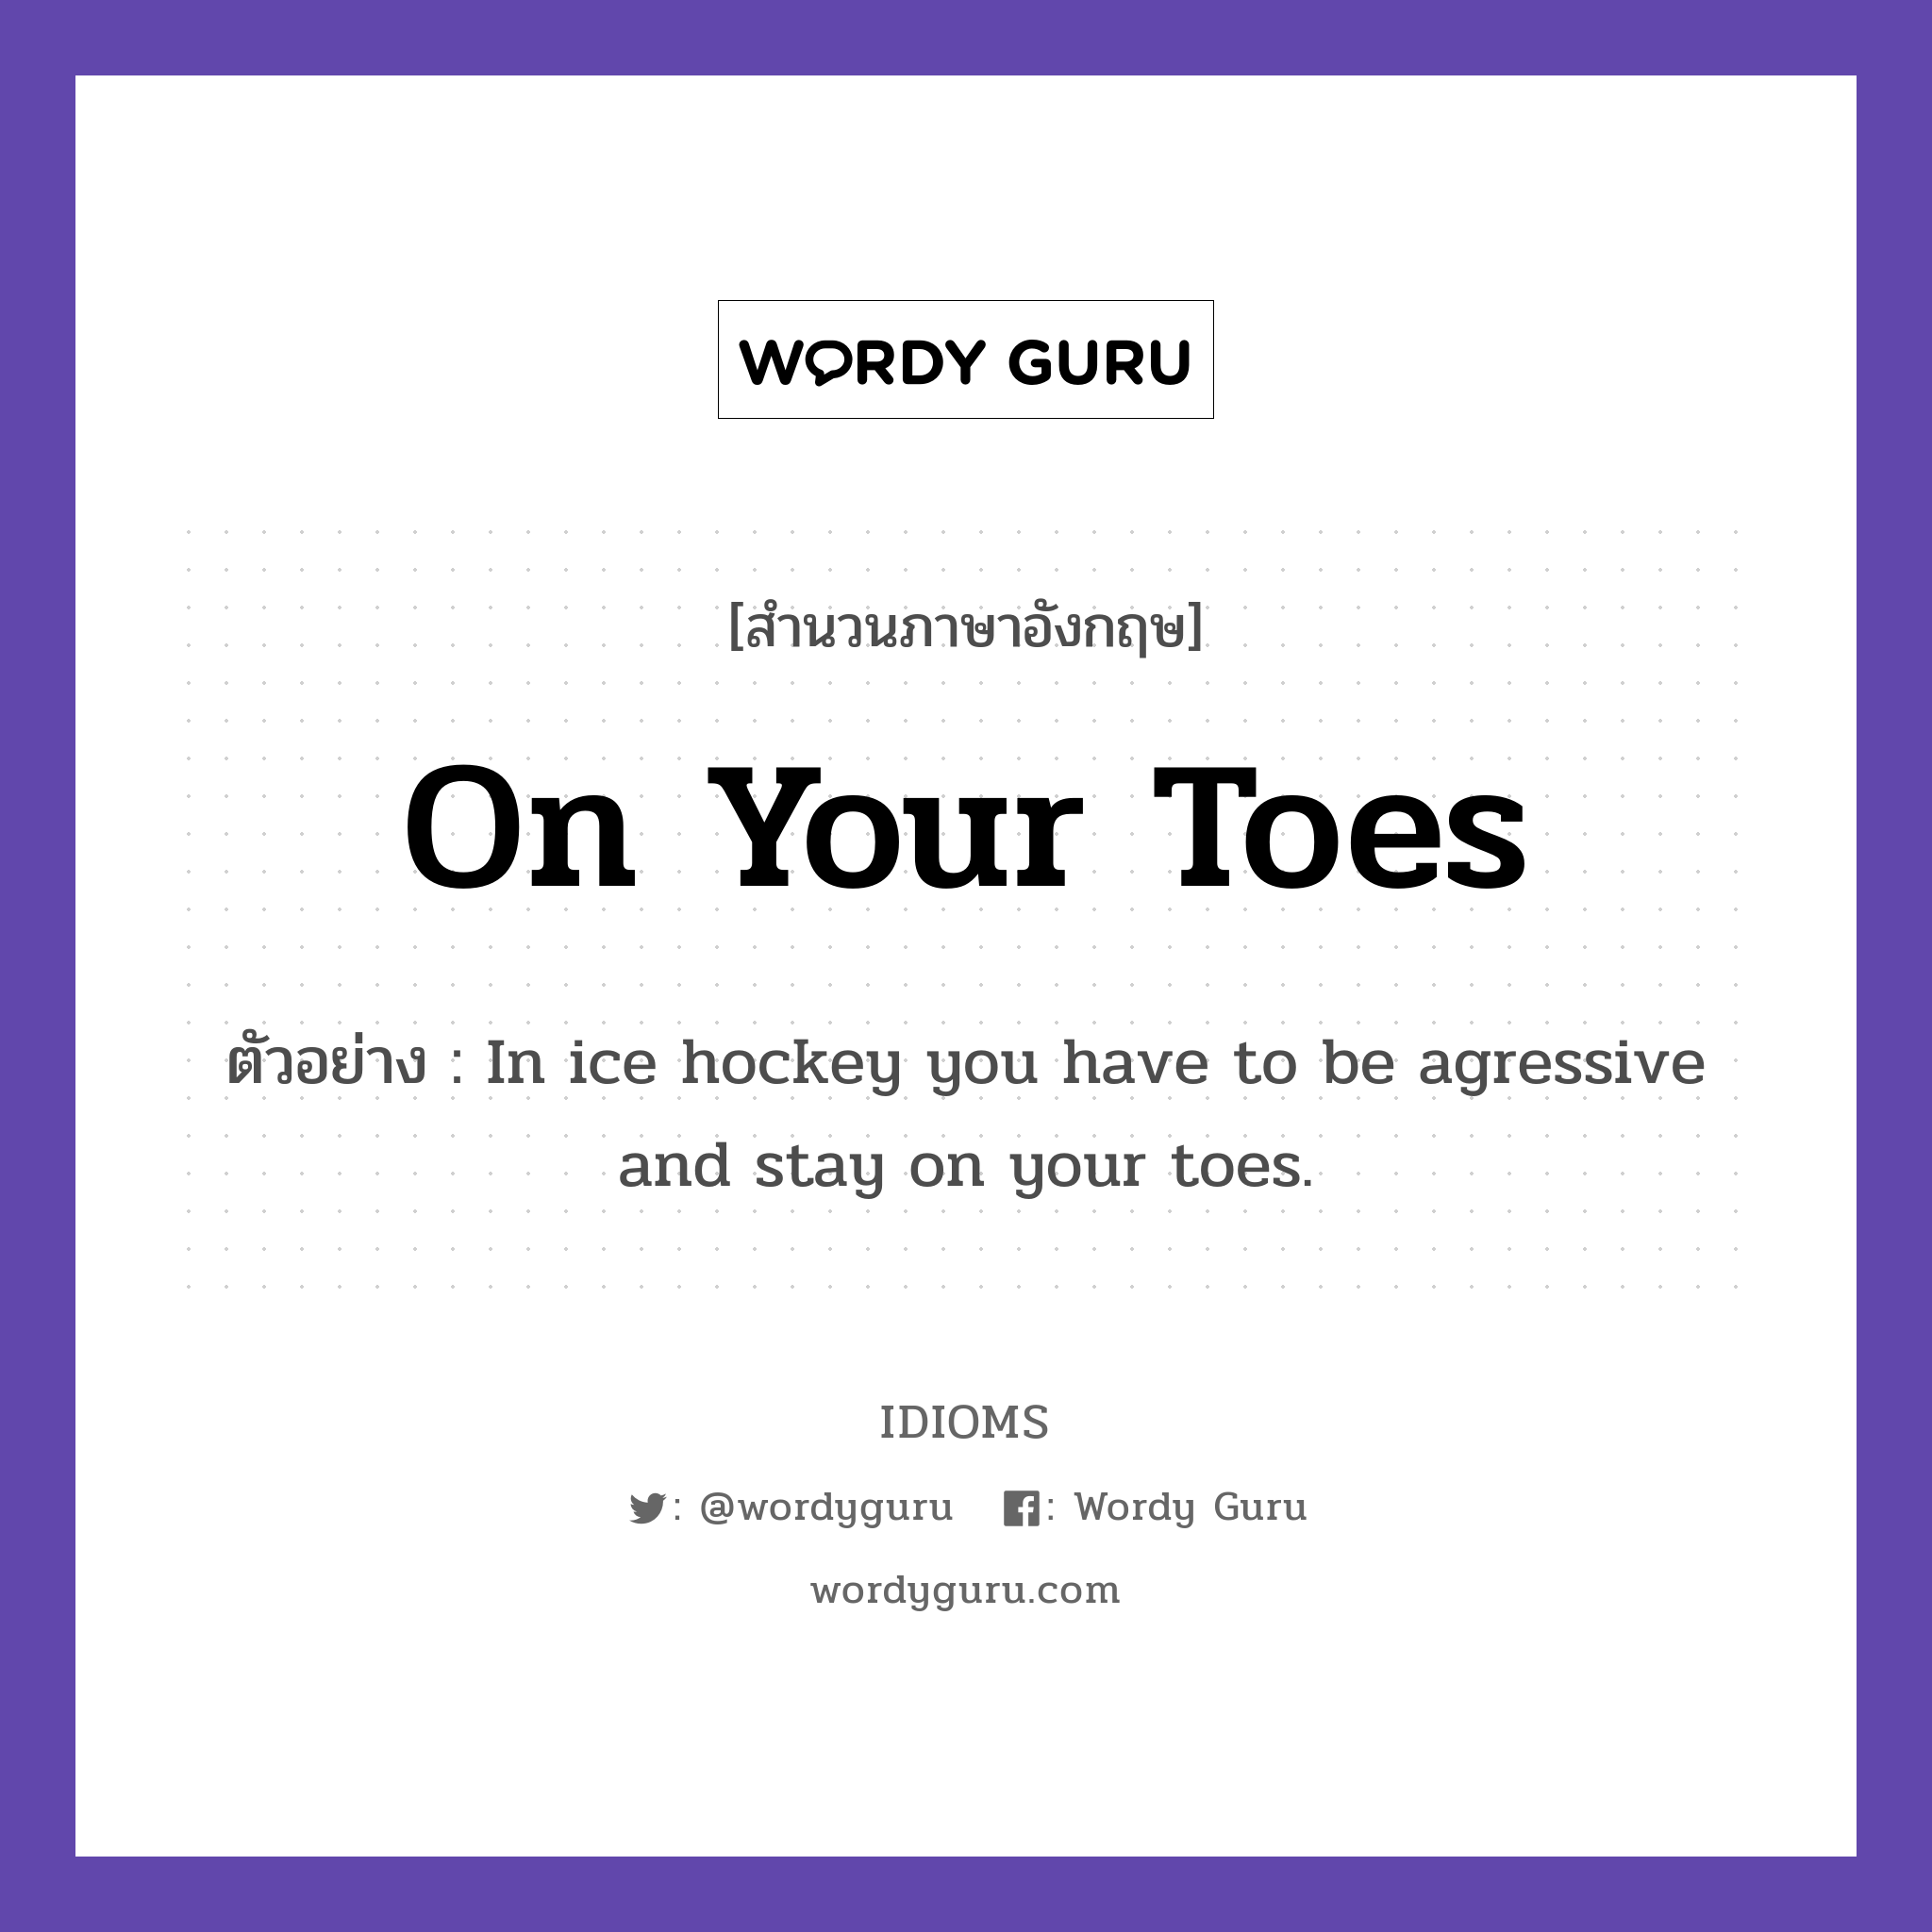 On Your Toes แปลว่า?, สำนวนภาษาอังกฤษ On Your Toes ตัวอย่าง In ice hockey you have to be agressive and stay on your toes.